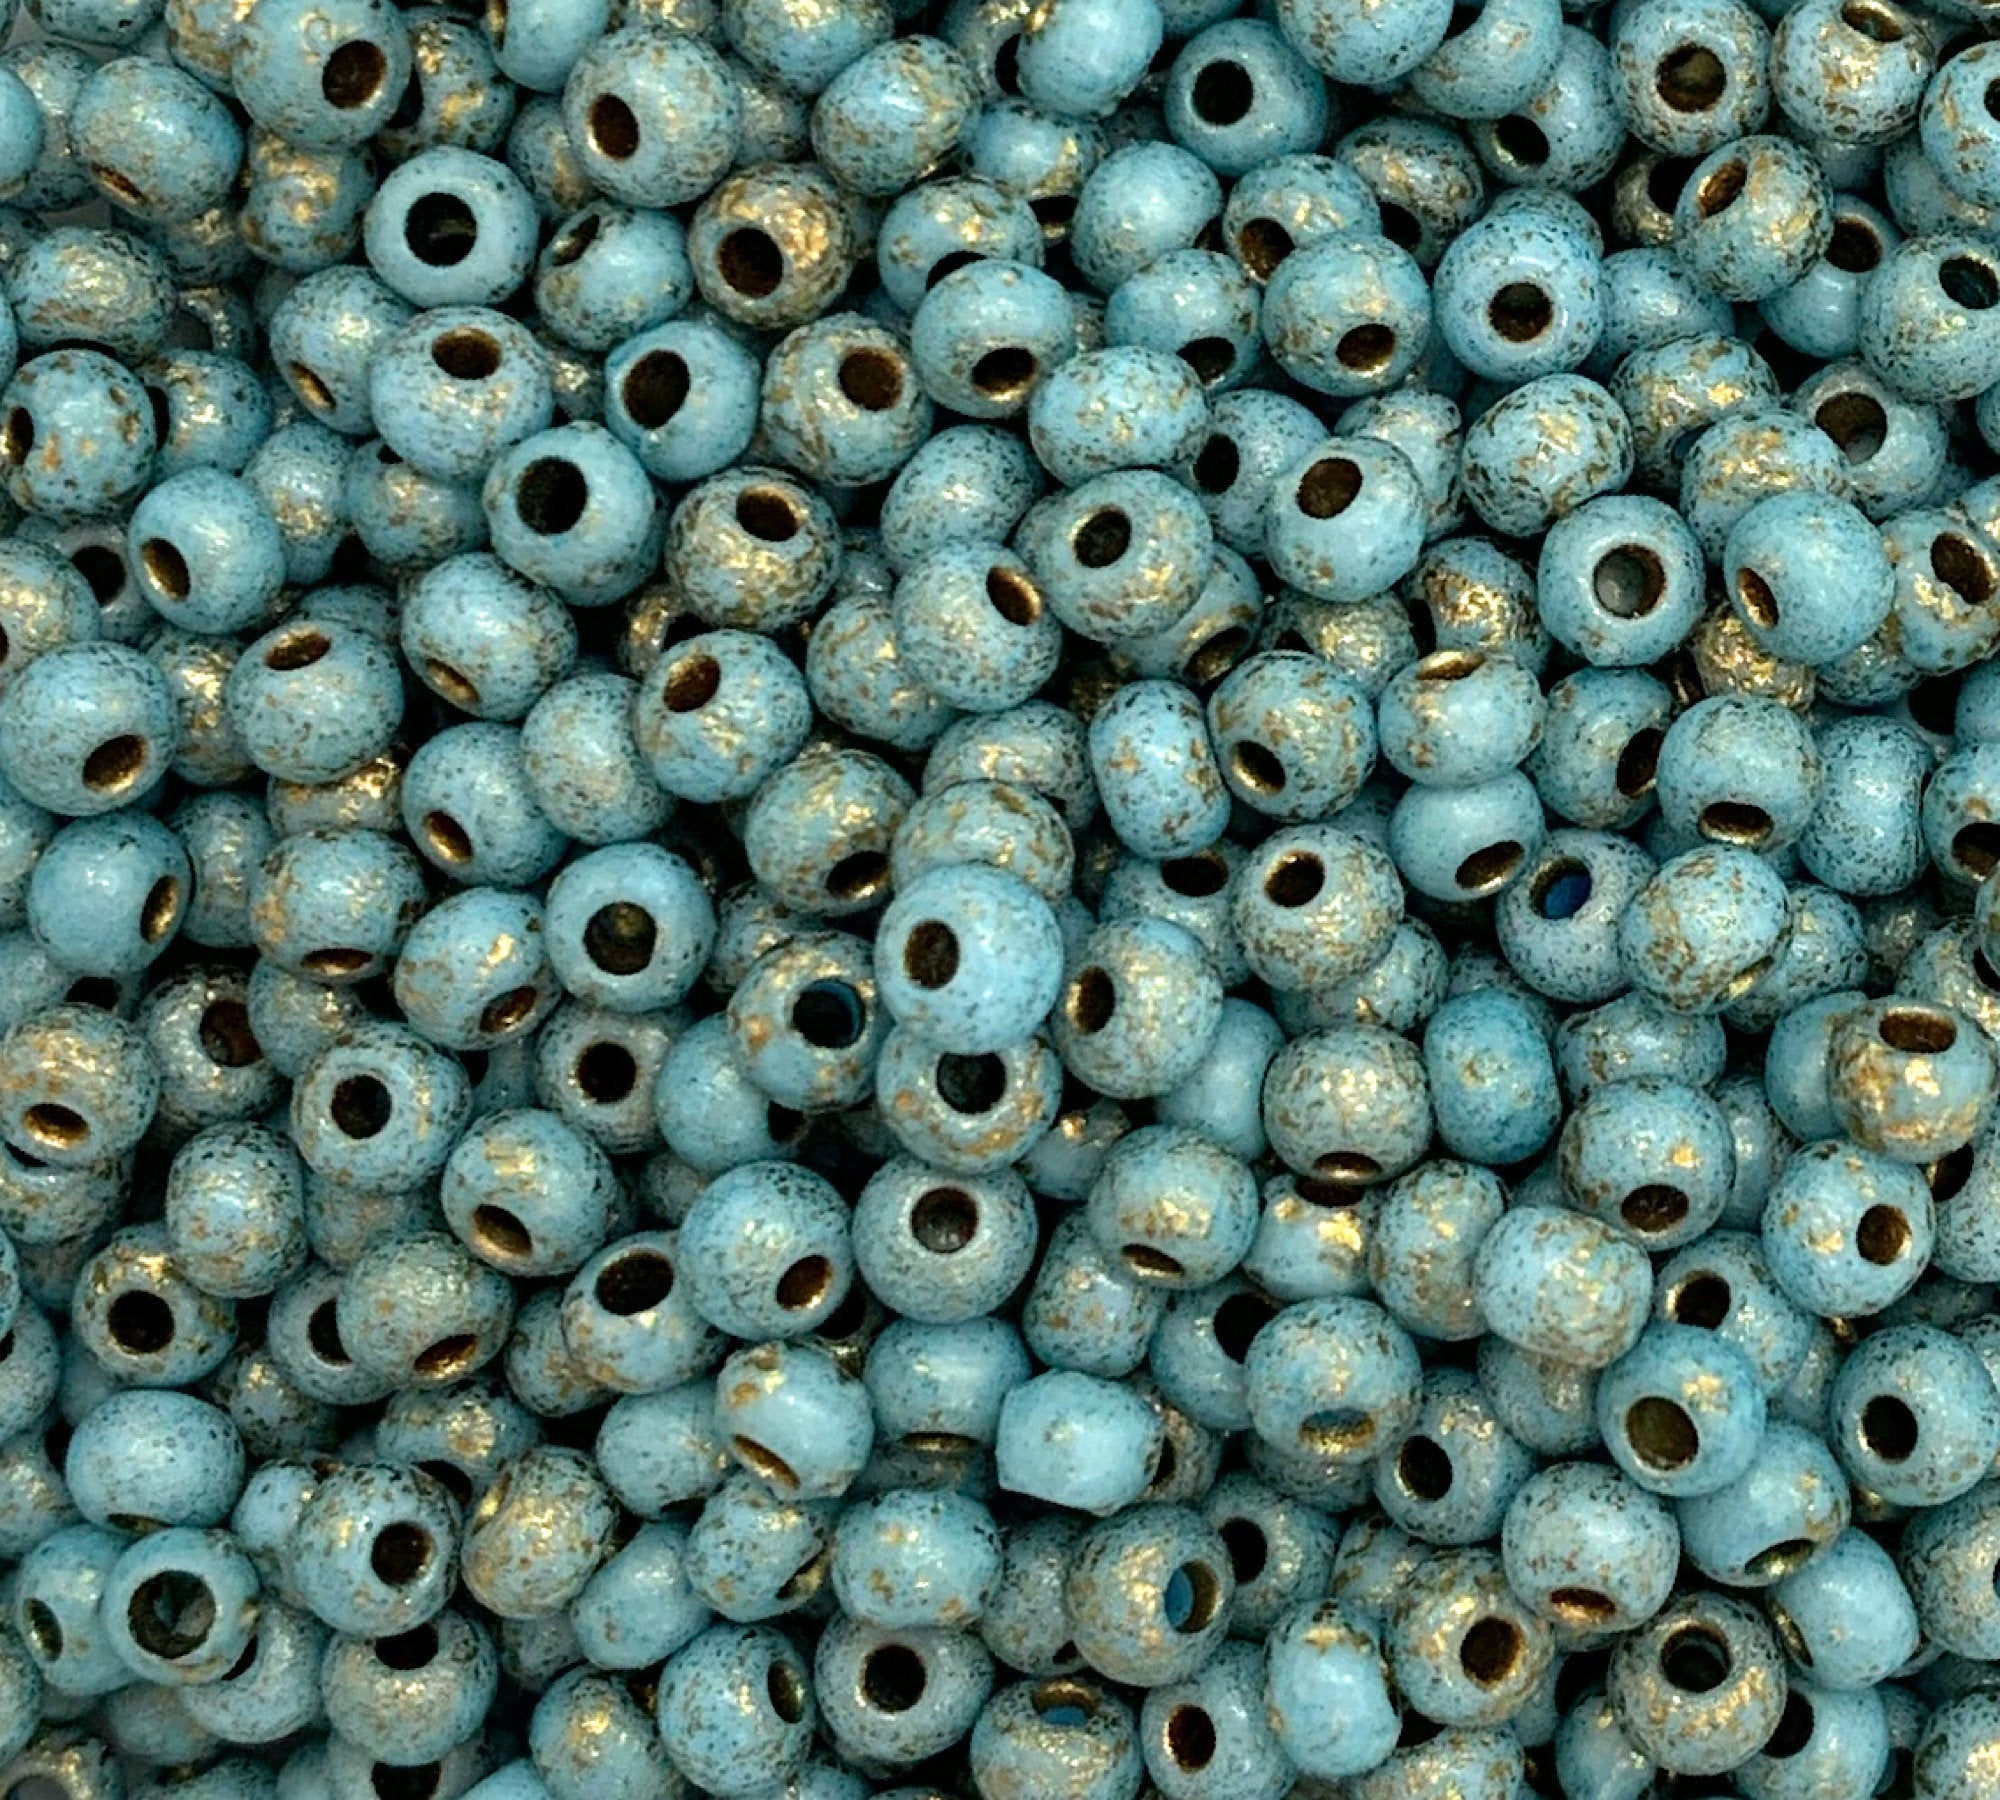 24 grams Czech glass seed beads - 6/0 etched turquoise or teal